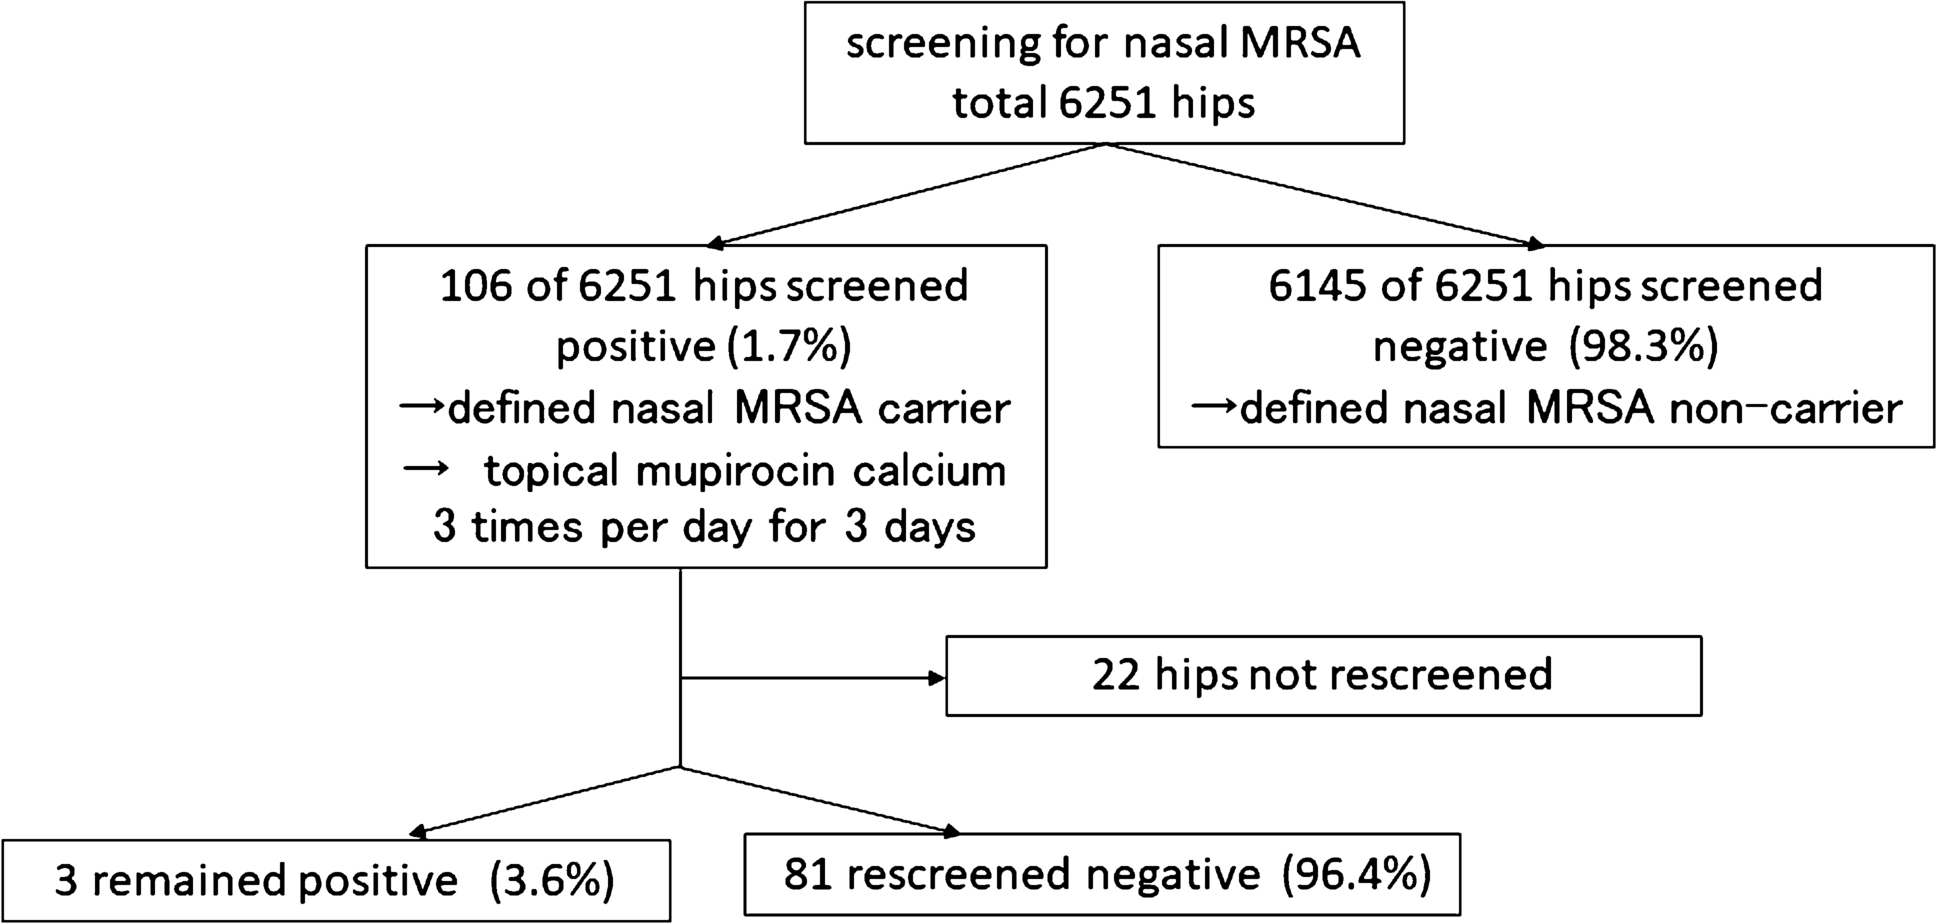 Clinical Efficacy of Nasal Screening and Methicillin-Resistant Staphylococcus aureus Decolonization in Total Hip Arthroplasty without Chlorhexidine Soap or Vancomycin